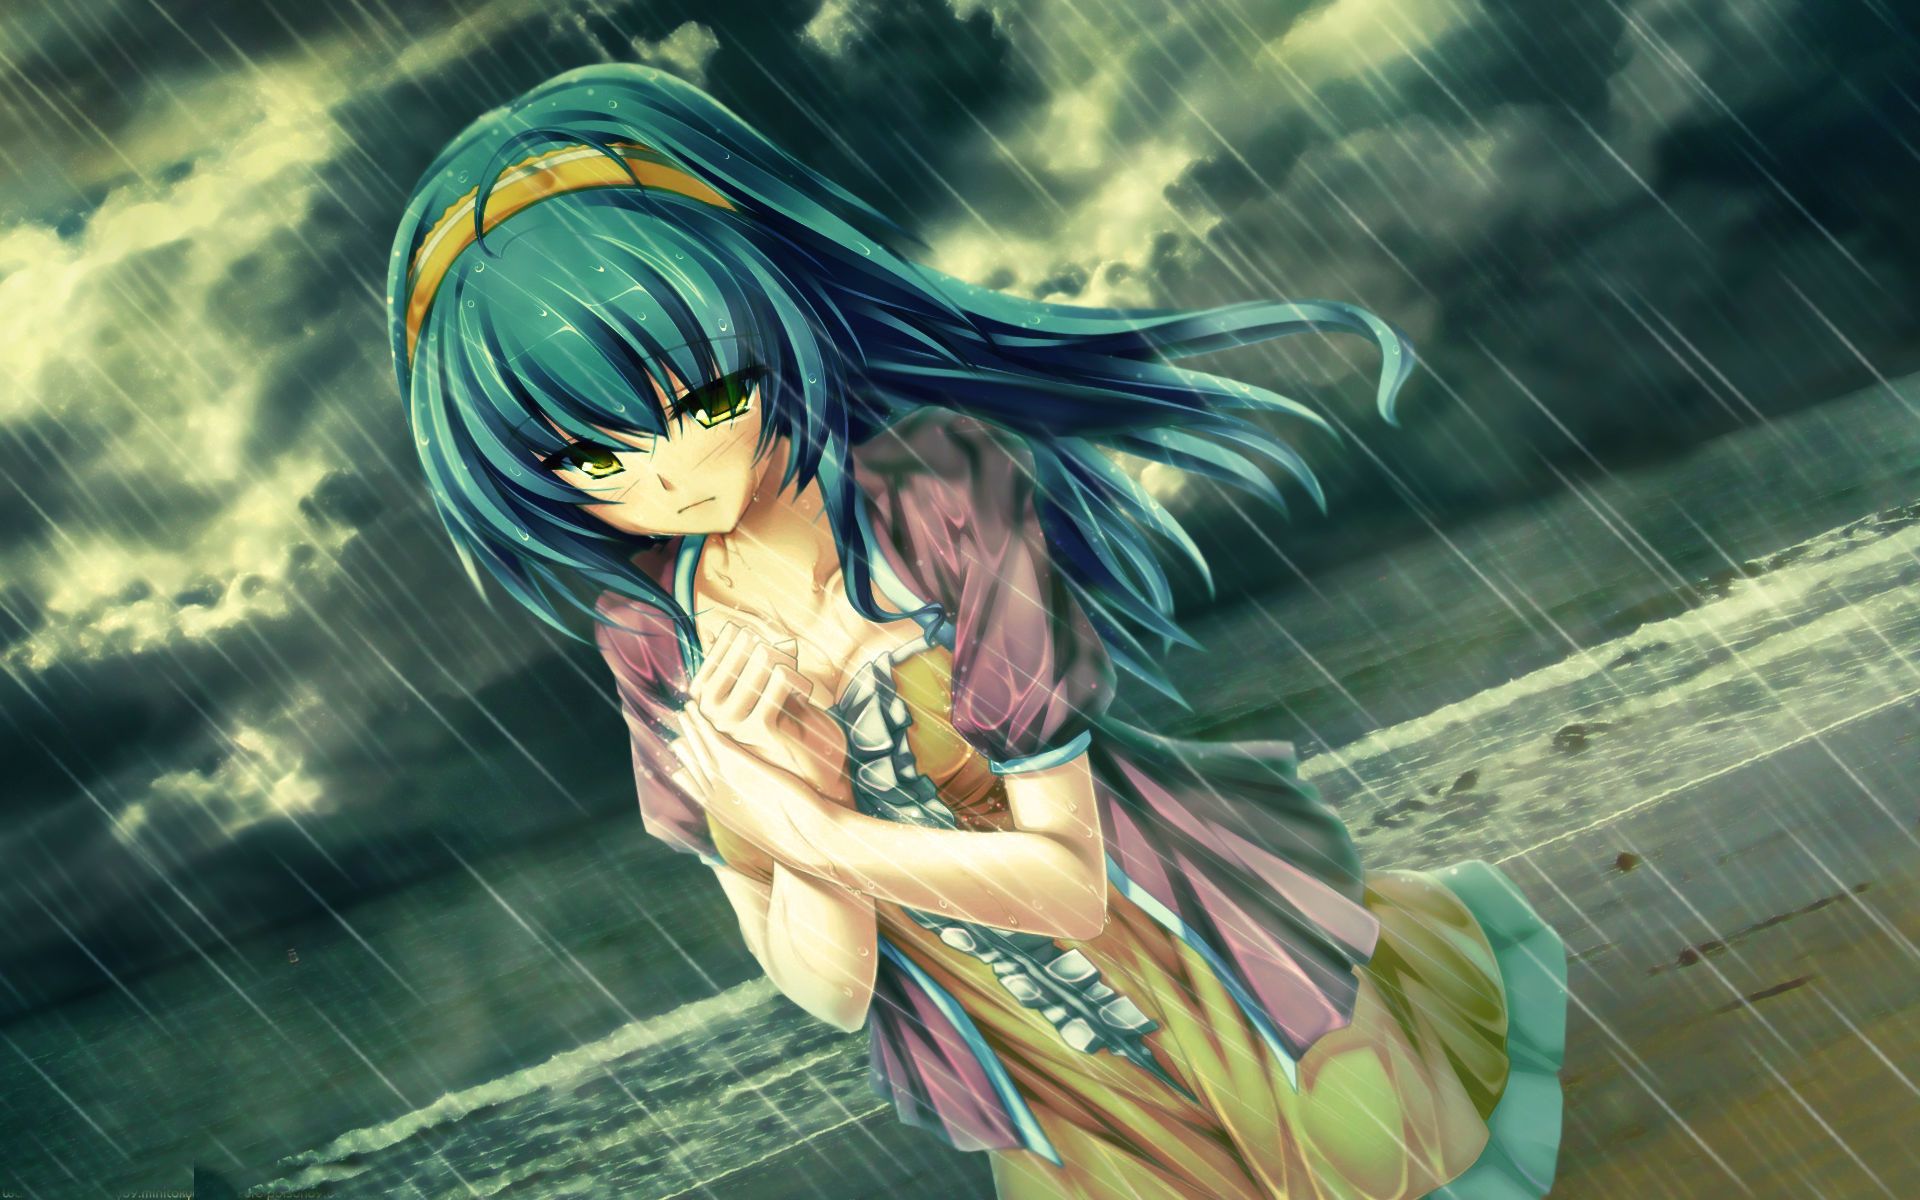 Anime Girls In Rain Wallpaper HD Pictures Live Hq